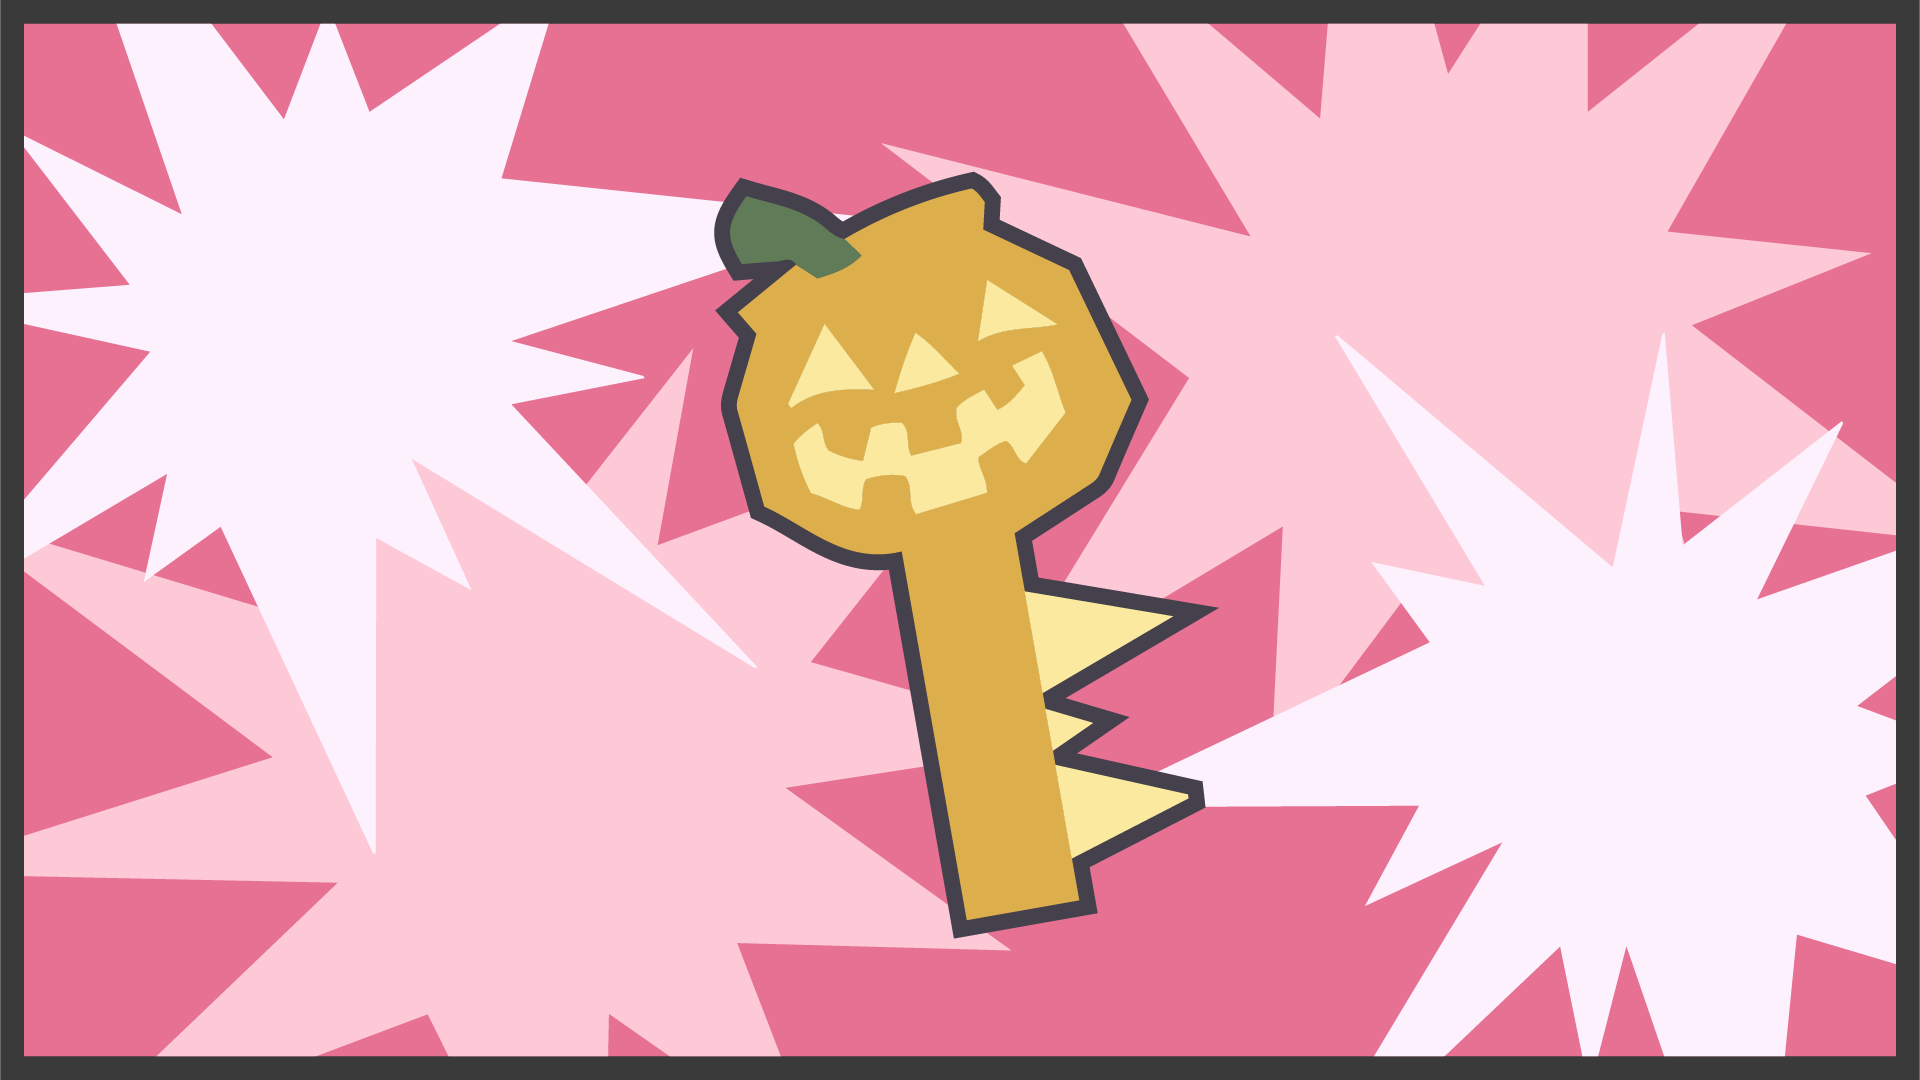 Icon for Happy Pawlloween!